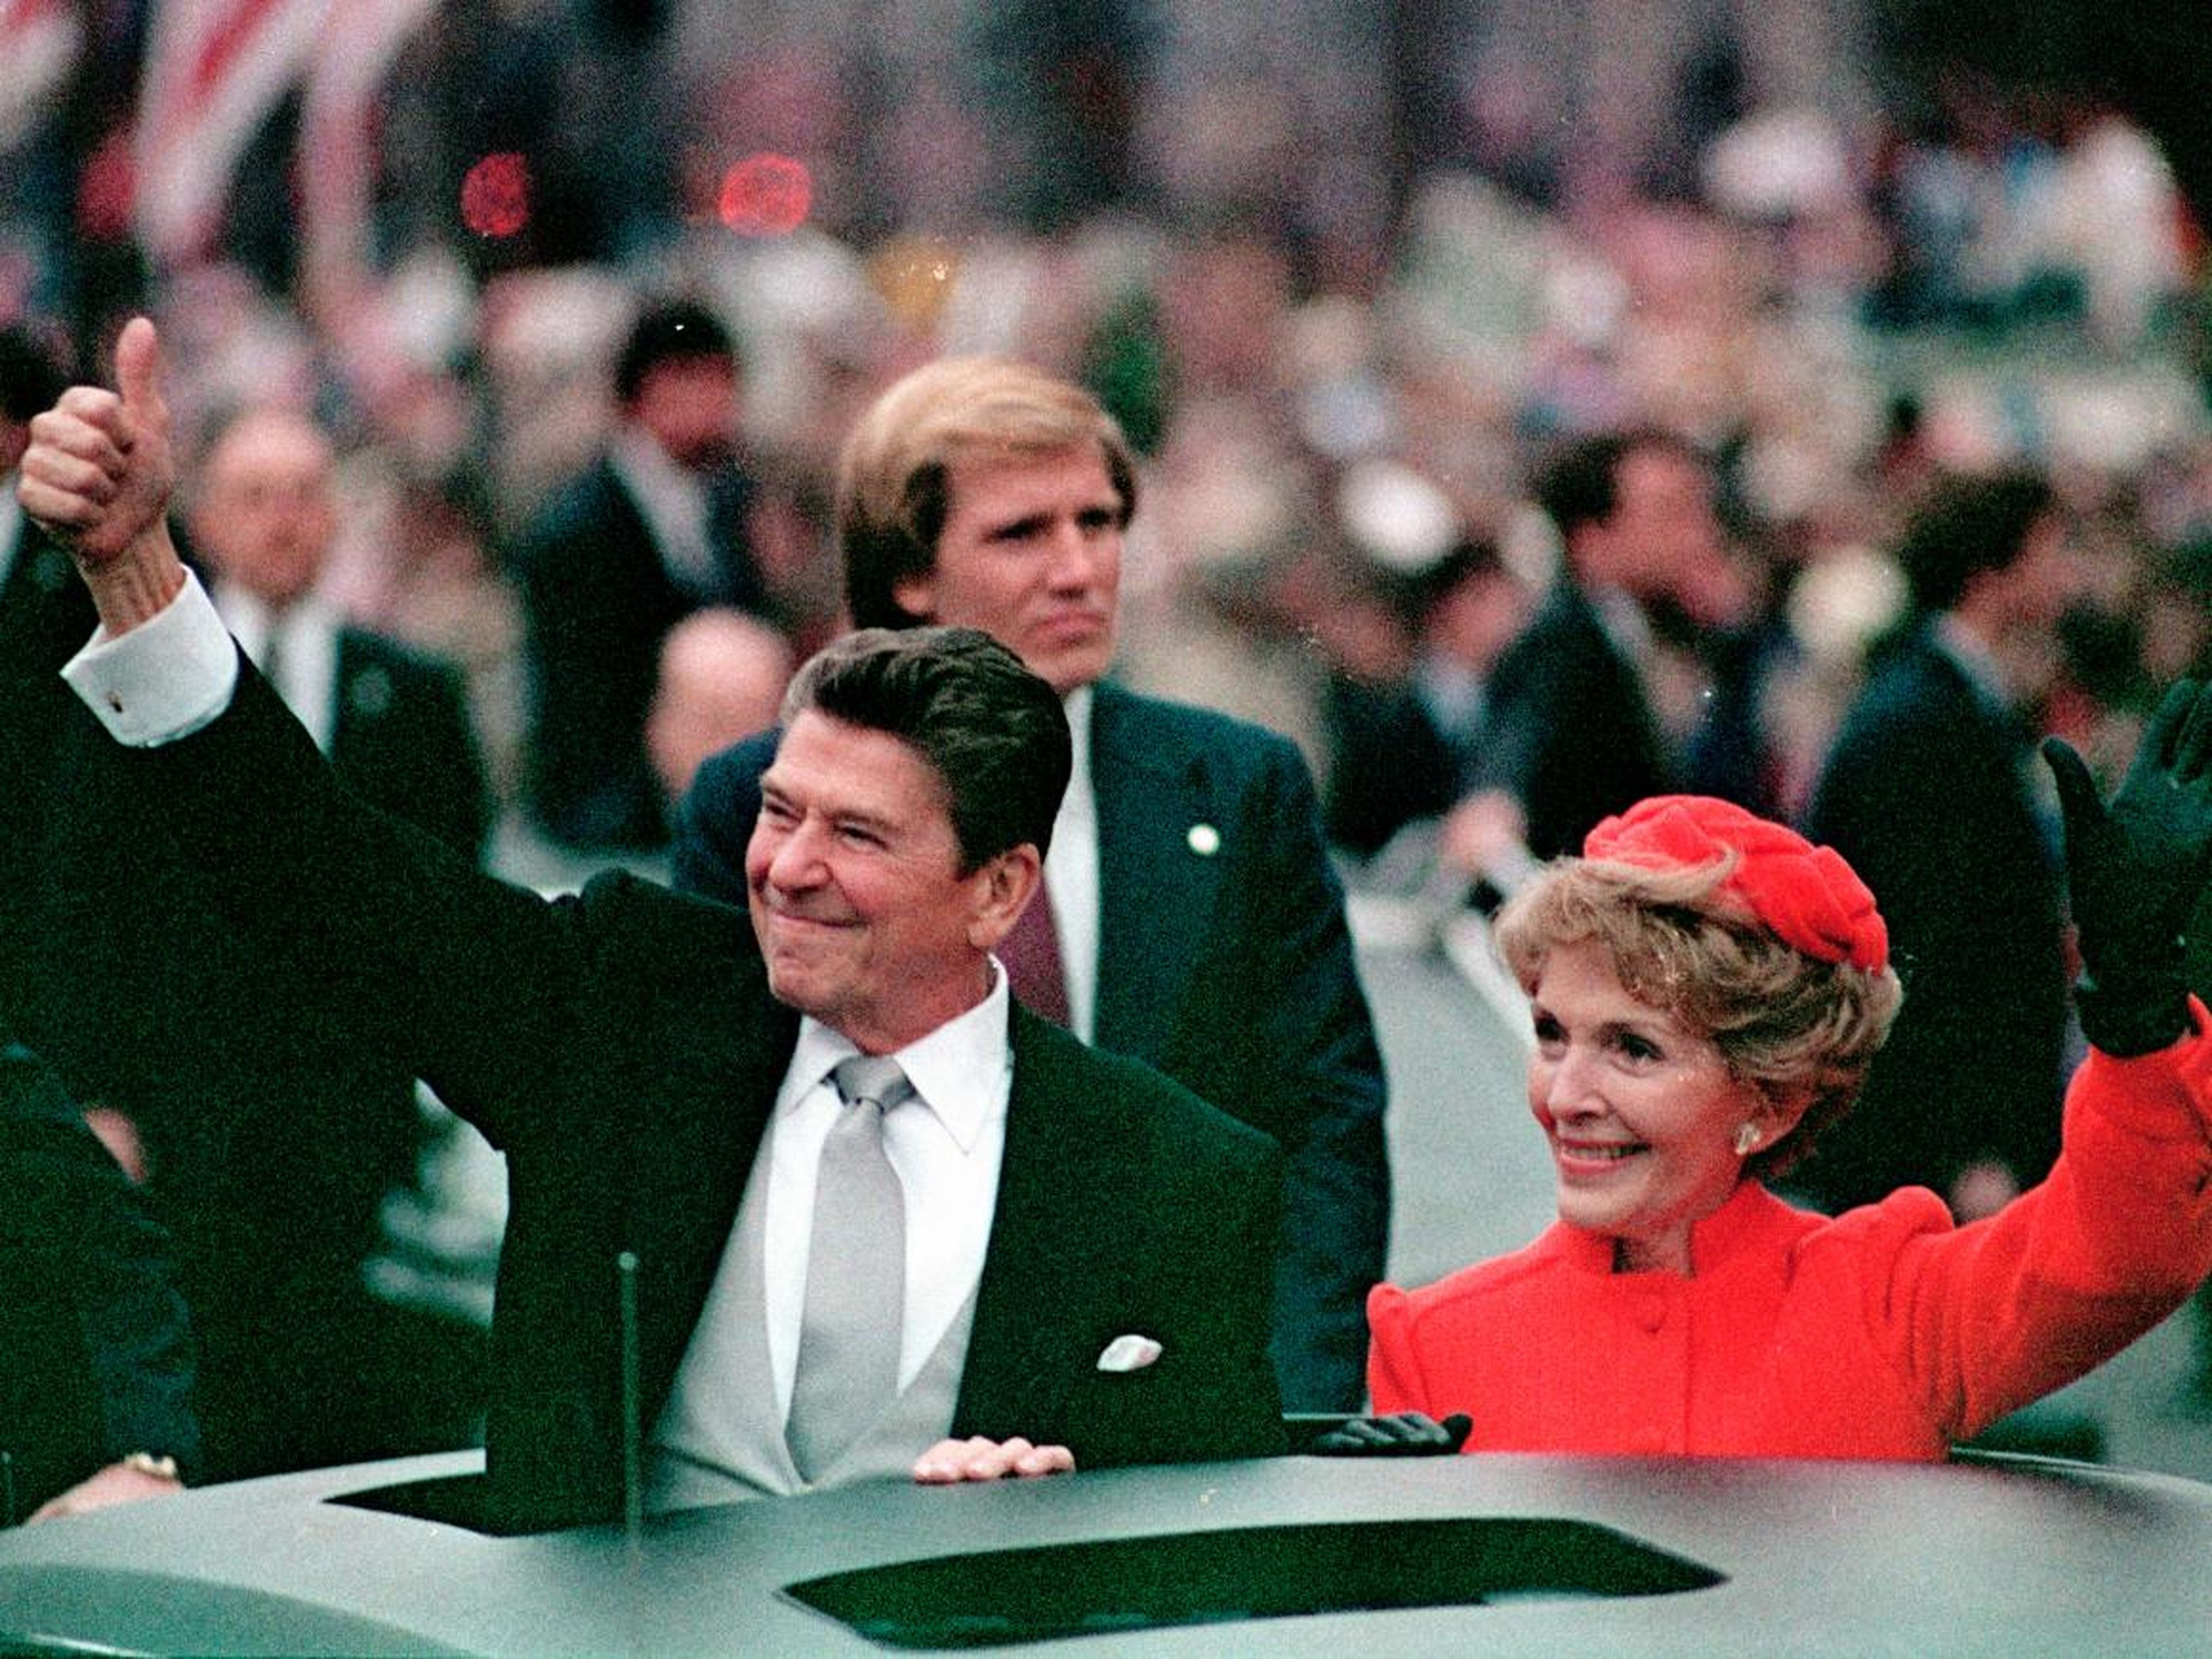 Former President Ronald Reagan and first lady Nancy Reagan greeted fans lined up in Washington at his first inauguration in January 1981. Though he was 69, his movie star appearance held up.